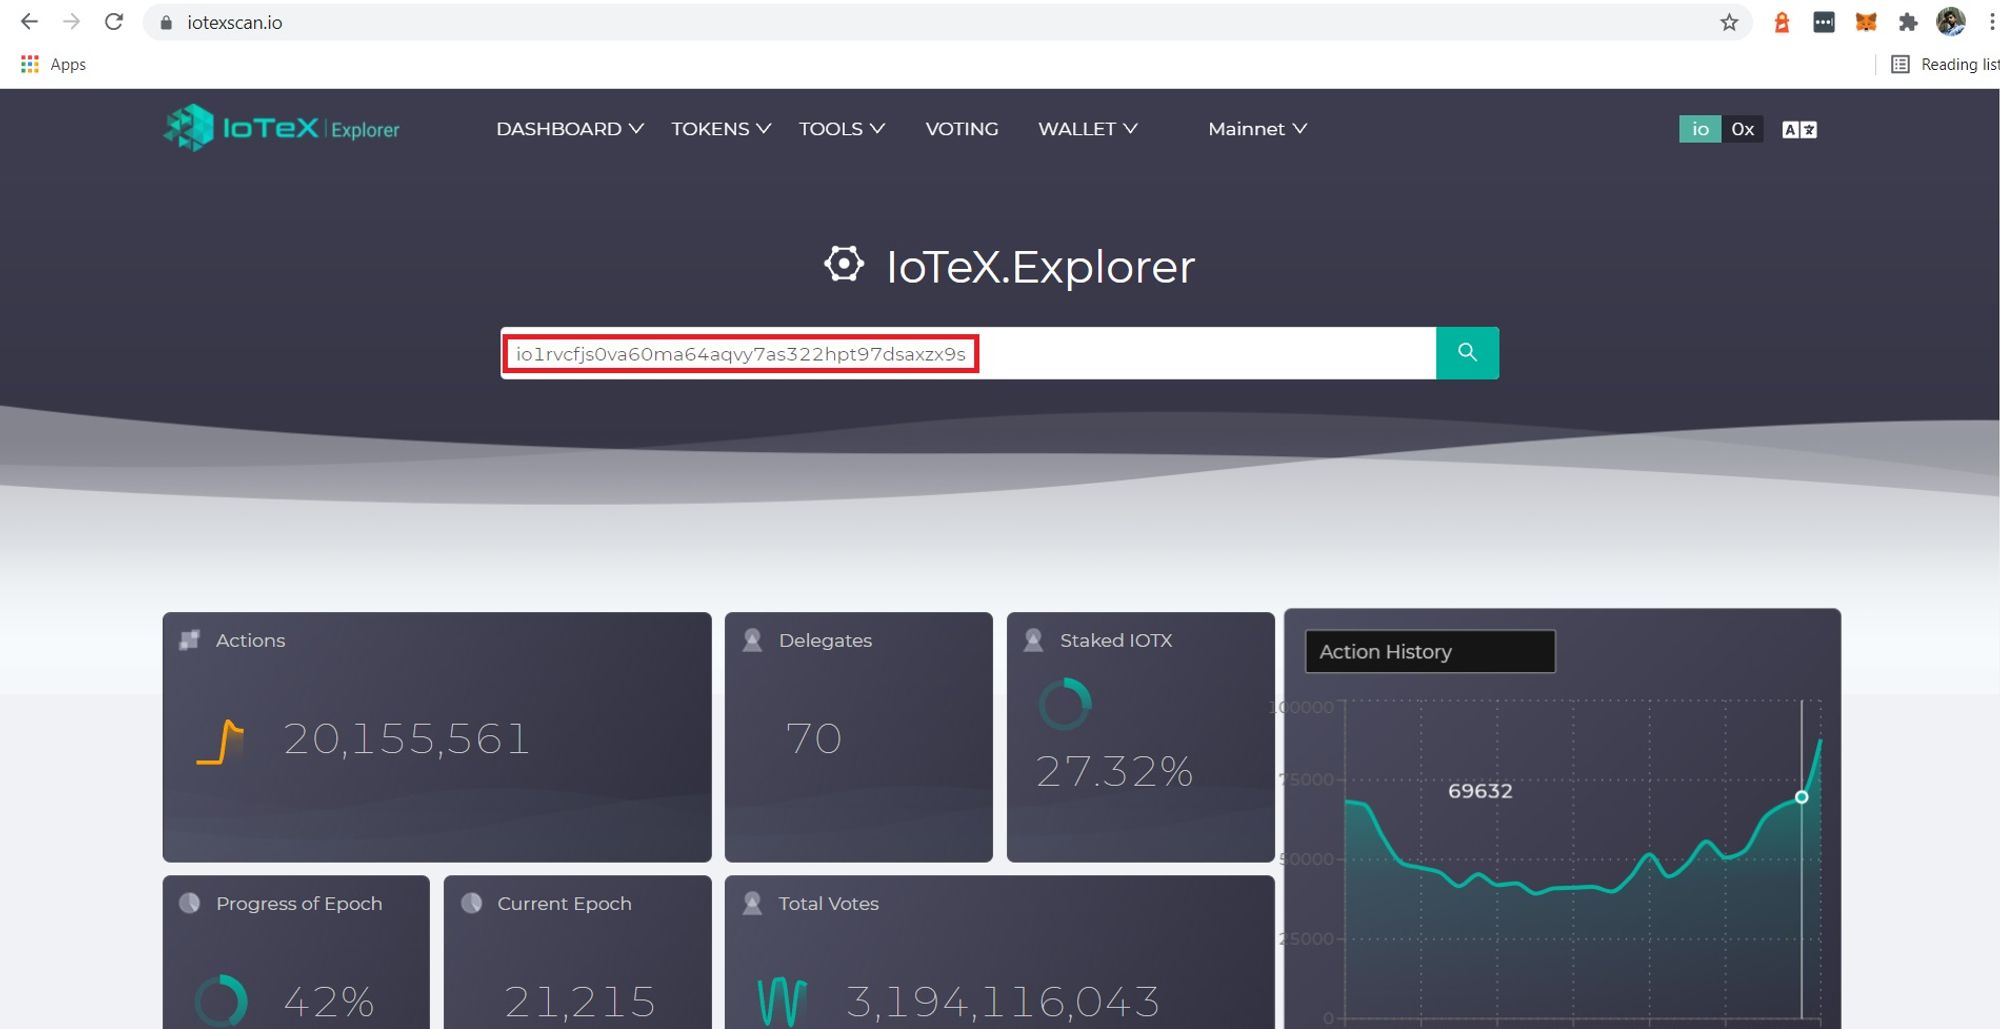 Verify your transaction on the IoTeX exporer